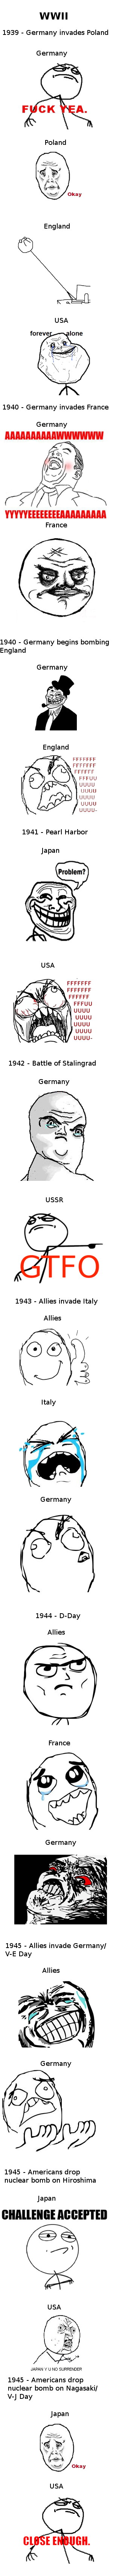 A short illustrated summary of WWII